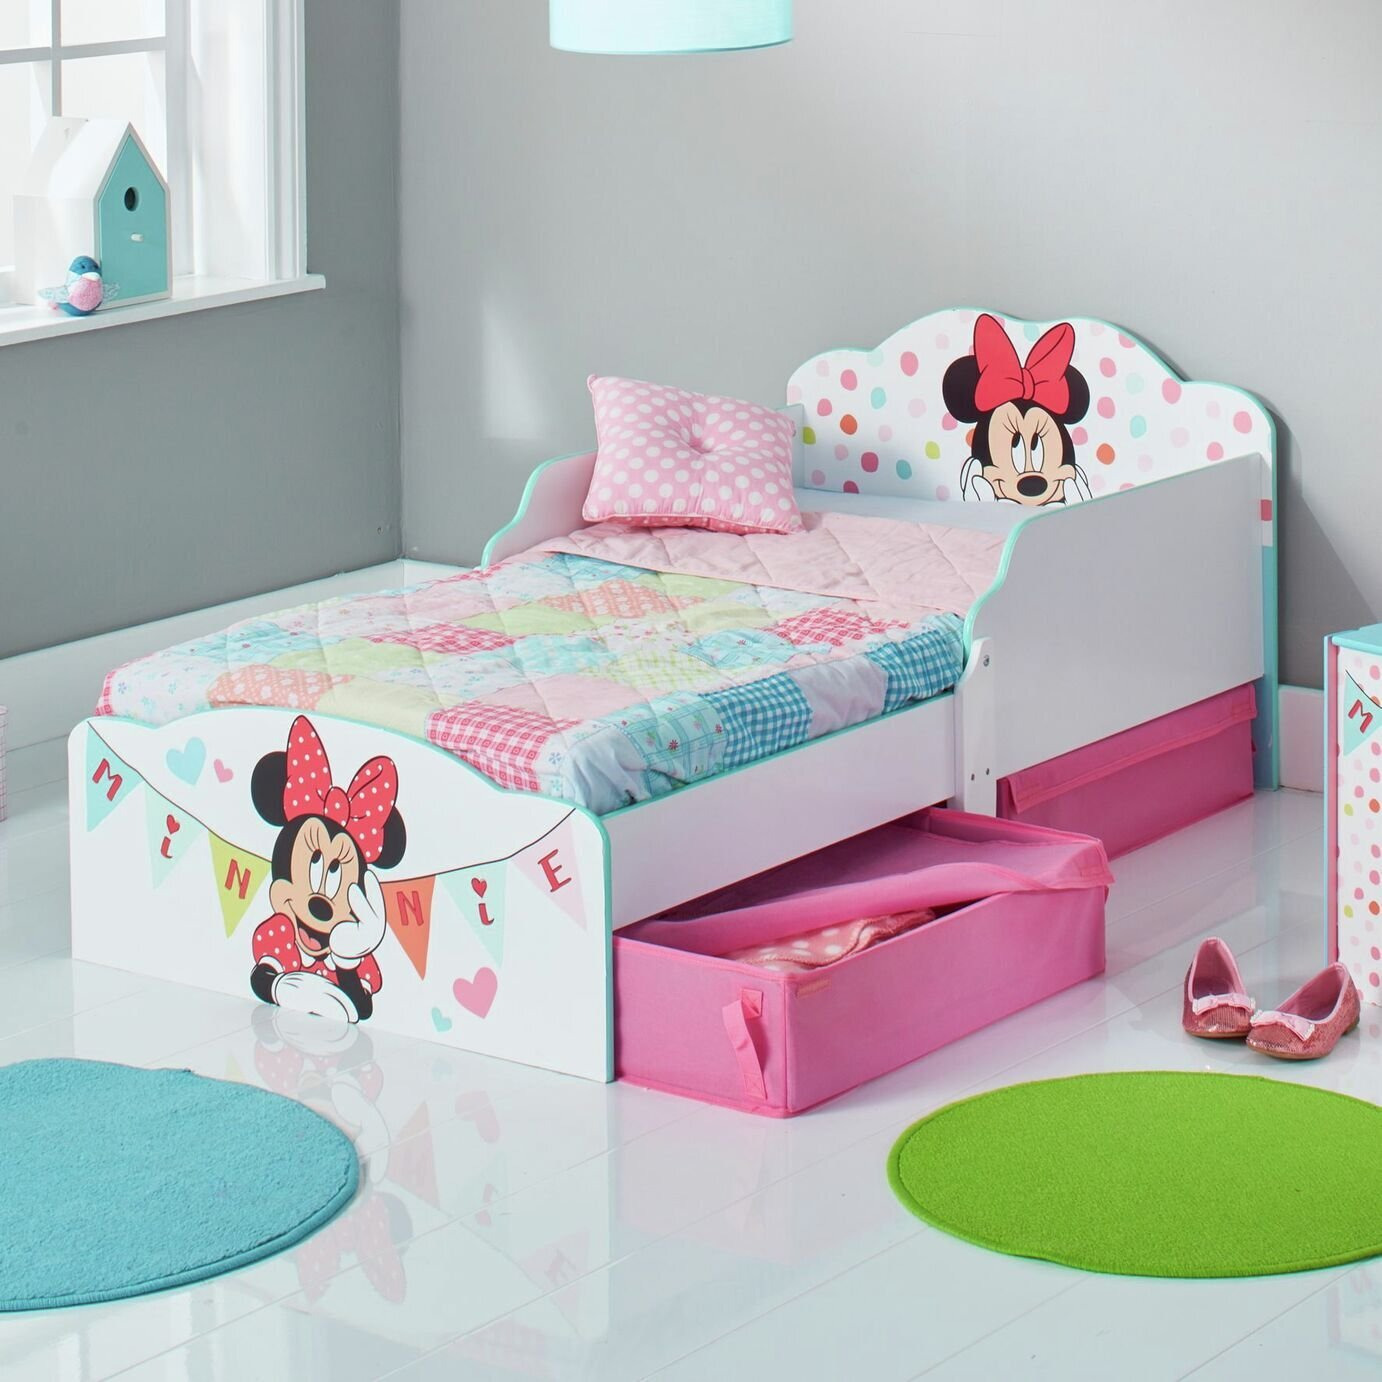 Disney Minnie Mouse Toddler Bed, Drawers & Kids Mattress - image 1